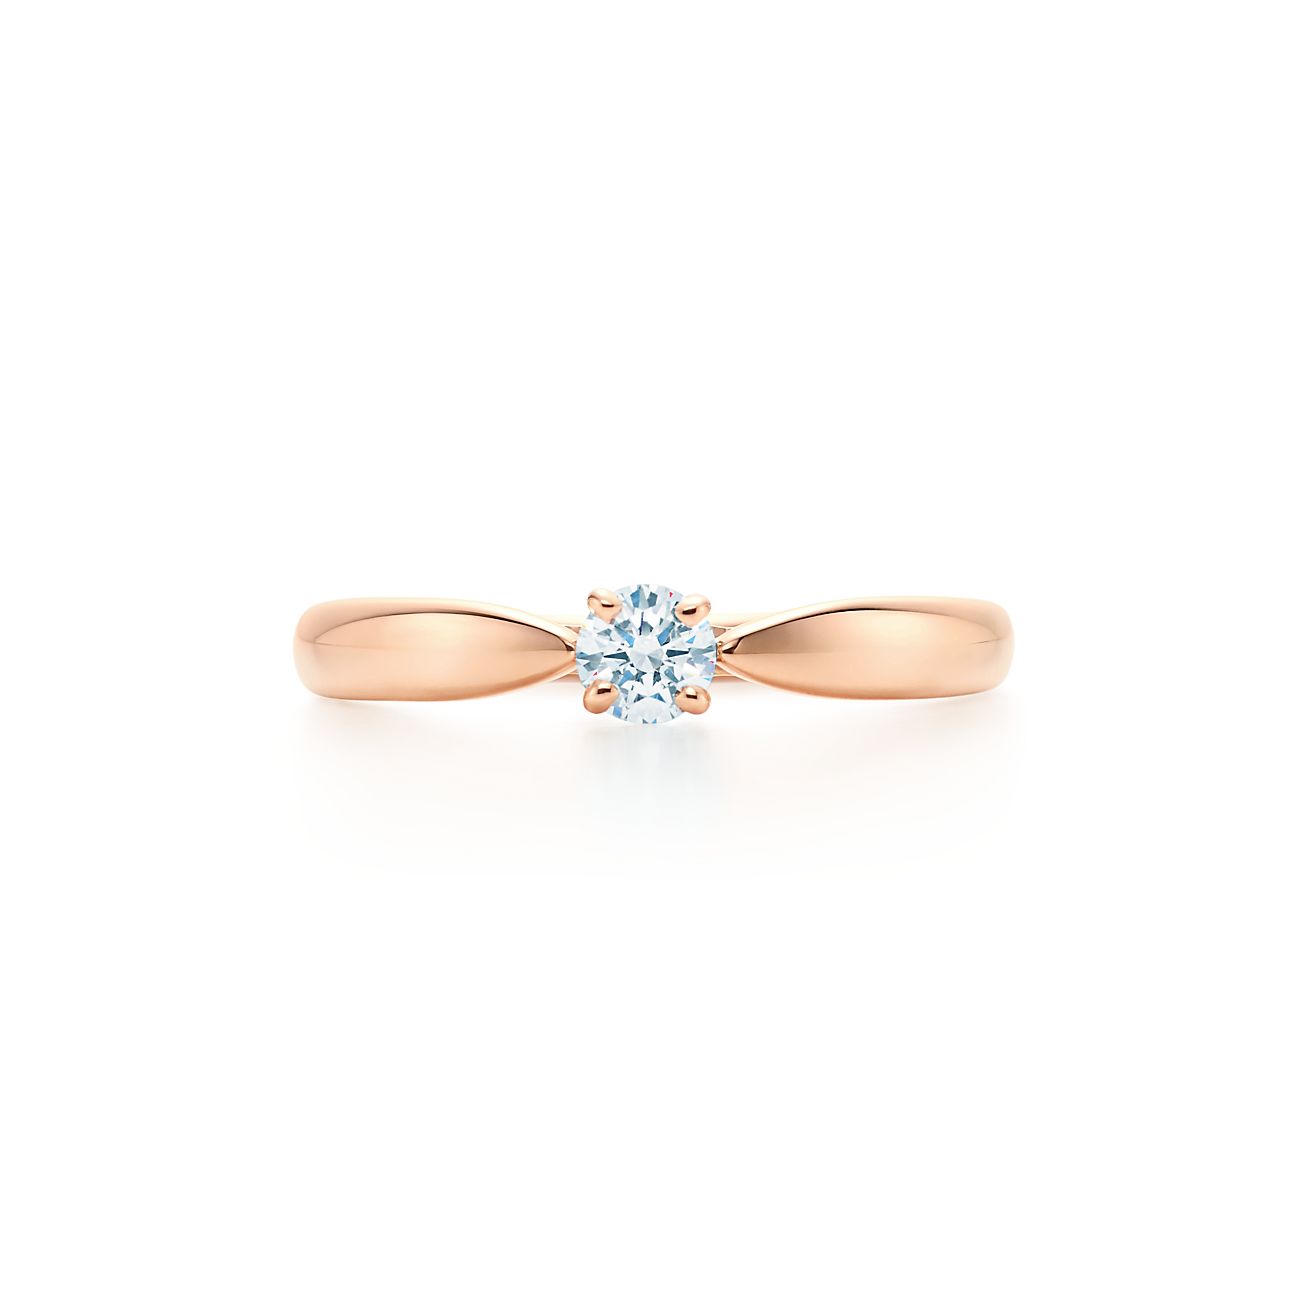 tiffany and co ring rose gold